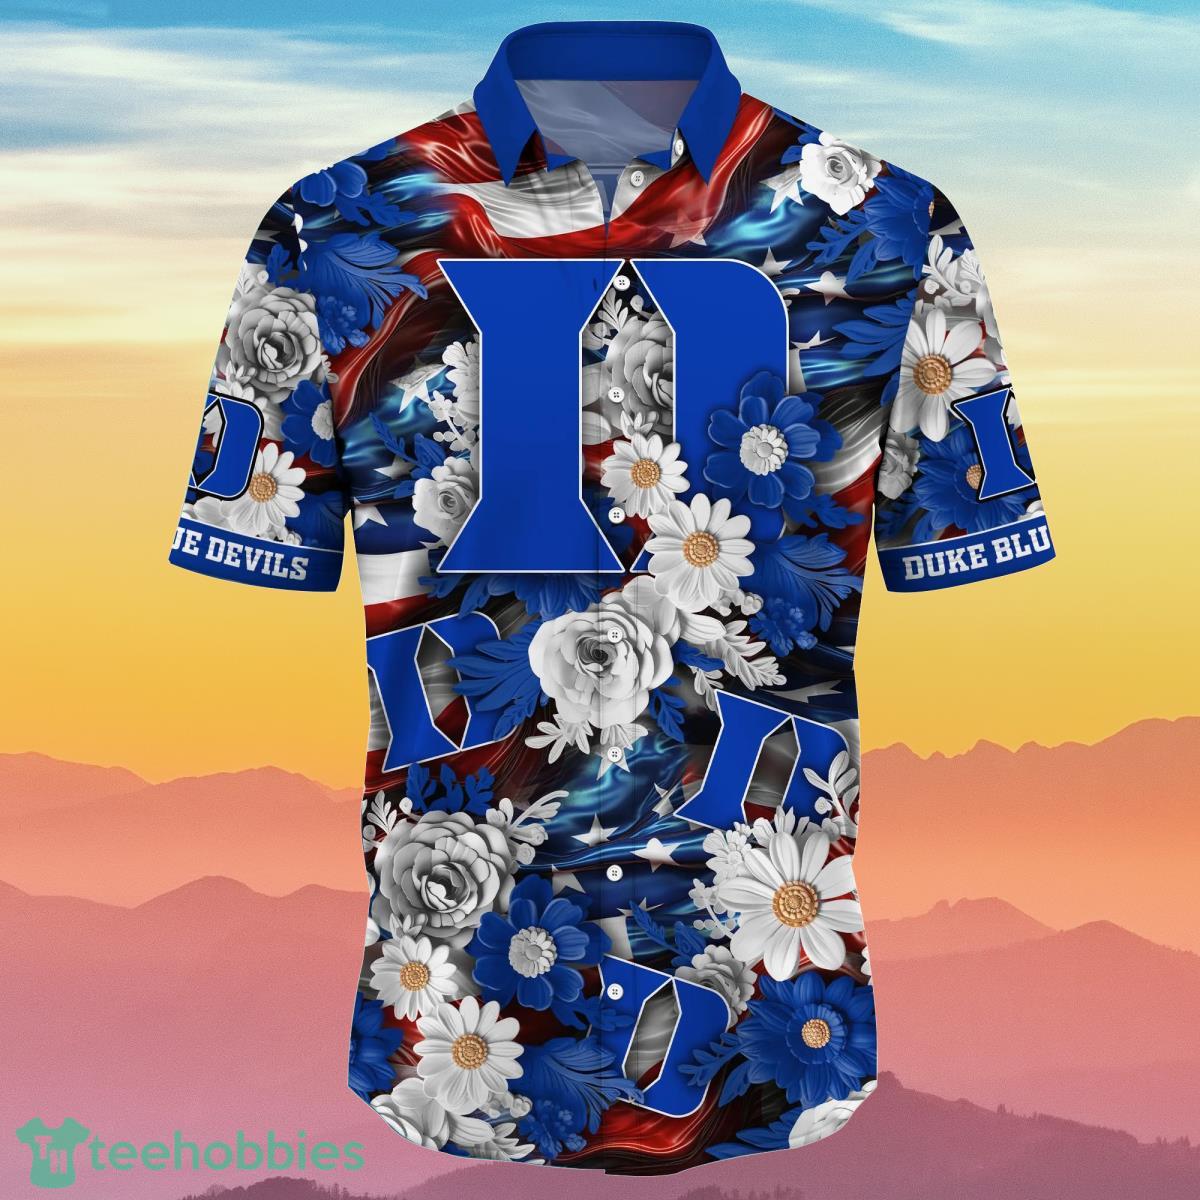 Duke Blue Devils NCAA2 Hawaiian Shirt 4th Of July Independence Day Special Gift For Men And Women Fans - Duke Blue Devils NCAA2 Hawaii Shirt Independence Day, Summer Shirts NA49922_3